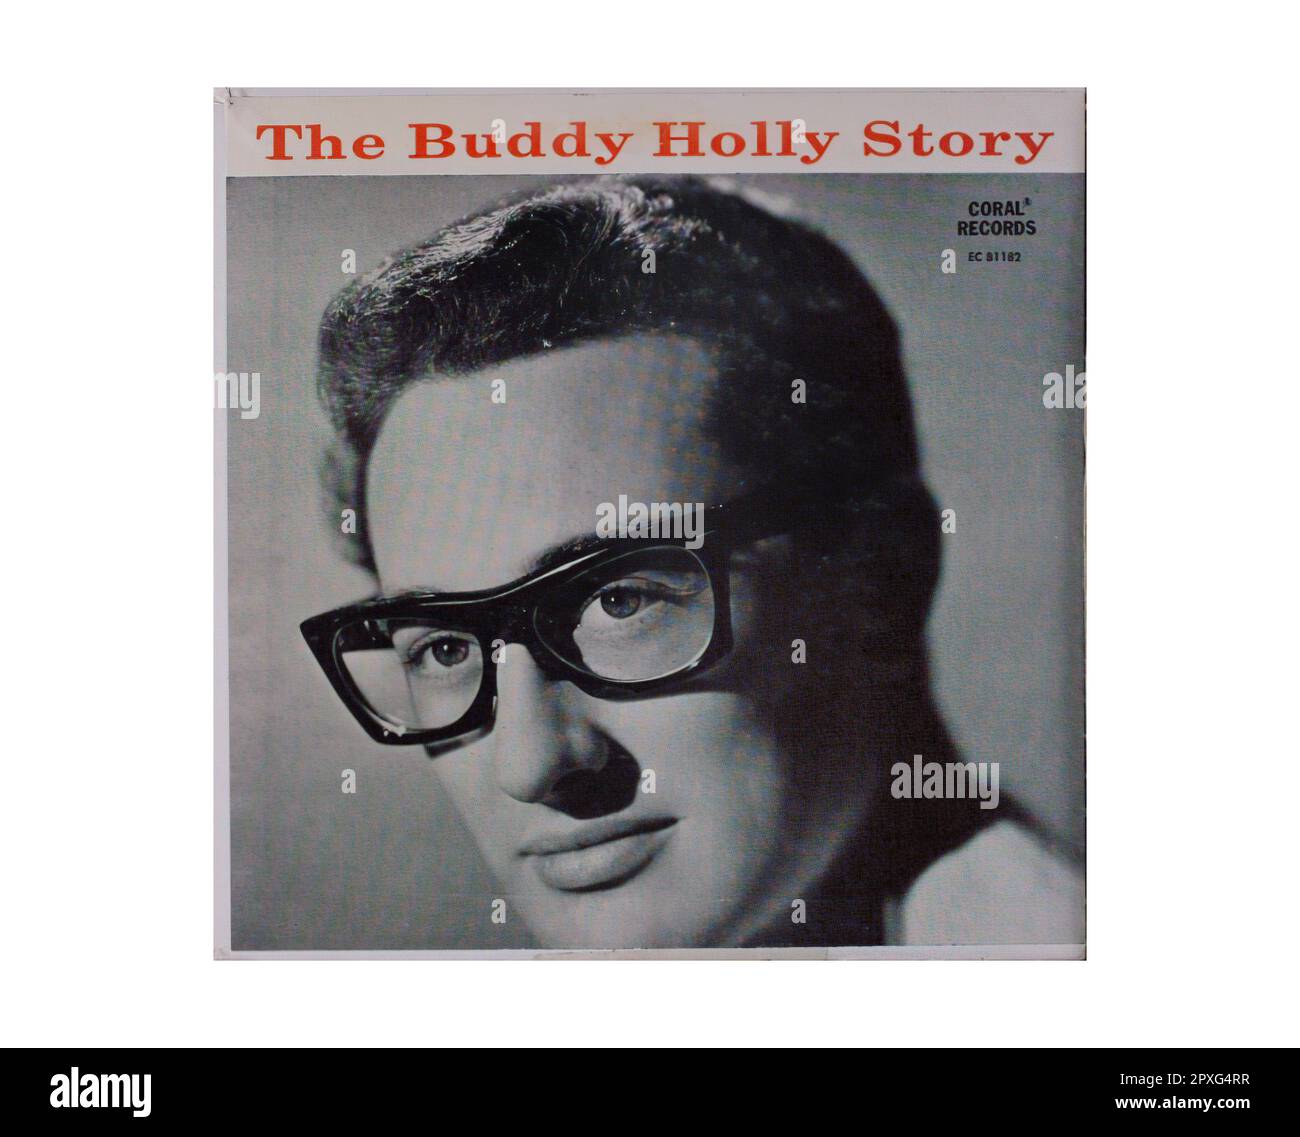 Holly Buddy 1959 01 - Extended Play 45 R.P.M - Vintage Vinyl Music Record Sleeve Stock Photo